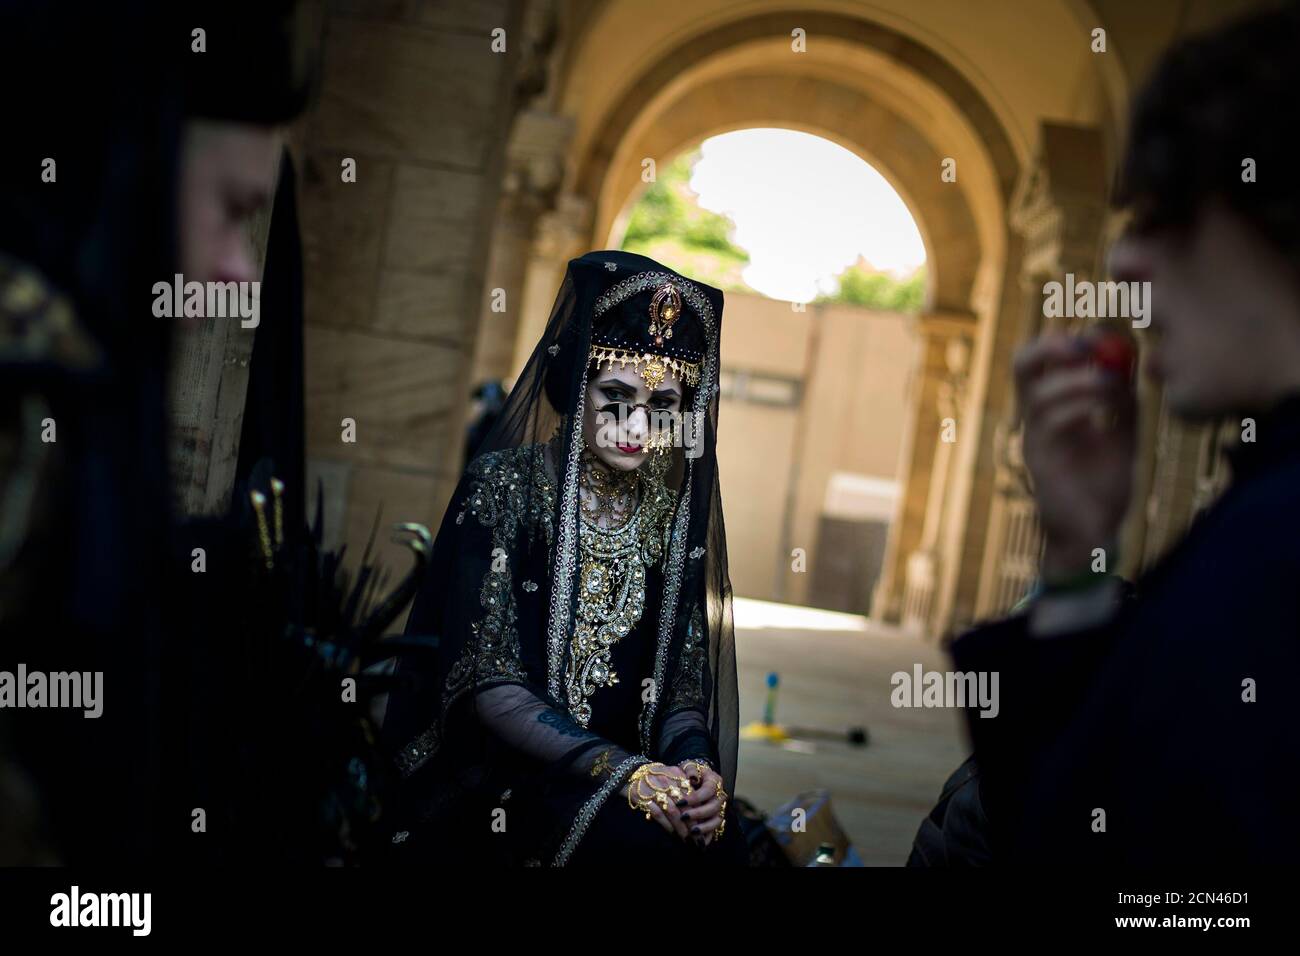 Revellers sit on the steps of the crematorium at the southern cemetery in Leipzig during the Wave and Goth festival June 7, 2014. The annual festival, known in Germany as Wave-Gotik Treffen (WGT), features over 150 bands and artist in venues all over the city playing Gothic rock and other styles of the dark wave music subculture. The event that counts as one of the biggest of its kind attracts a regular audience of up to 20,000 the organisers said.  REUTERS/Thomas Peter (GERMANY  - Tags: SOCIETY) Stock Photo